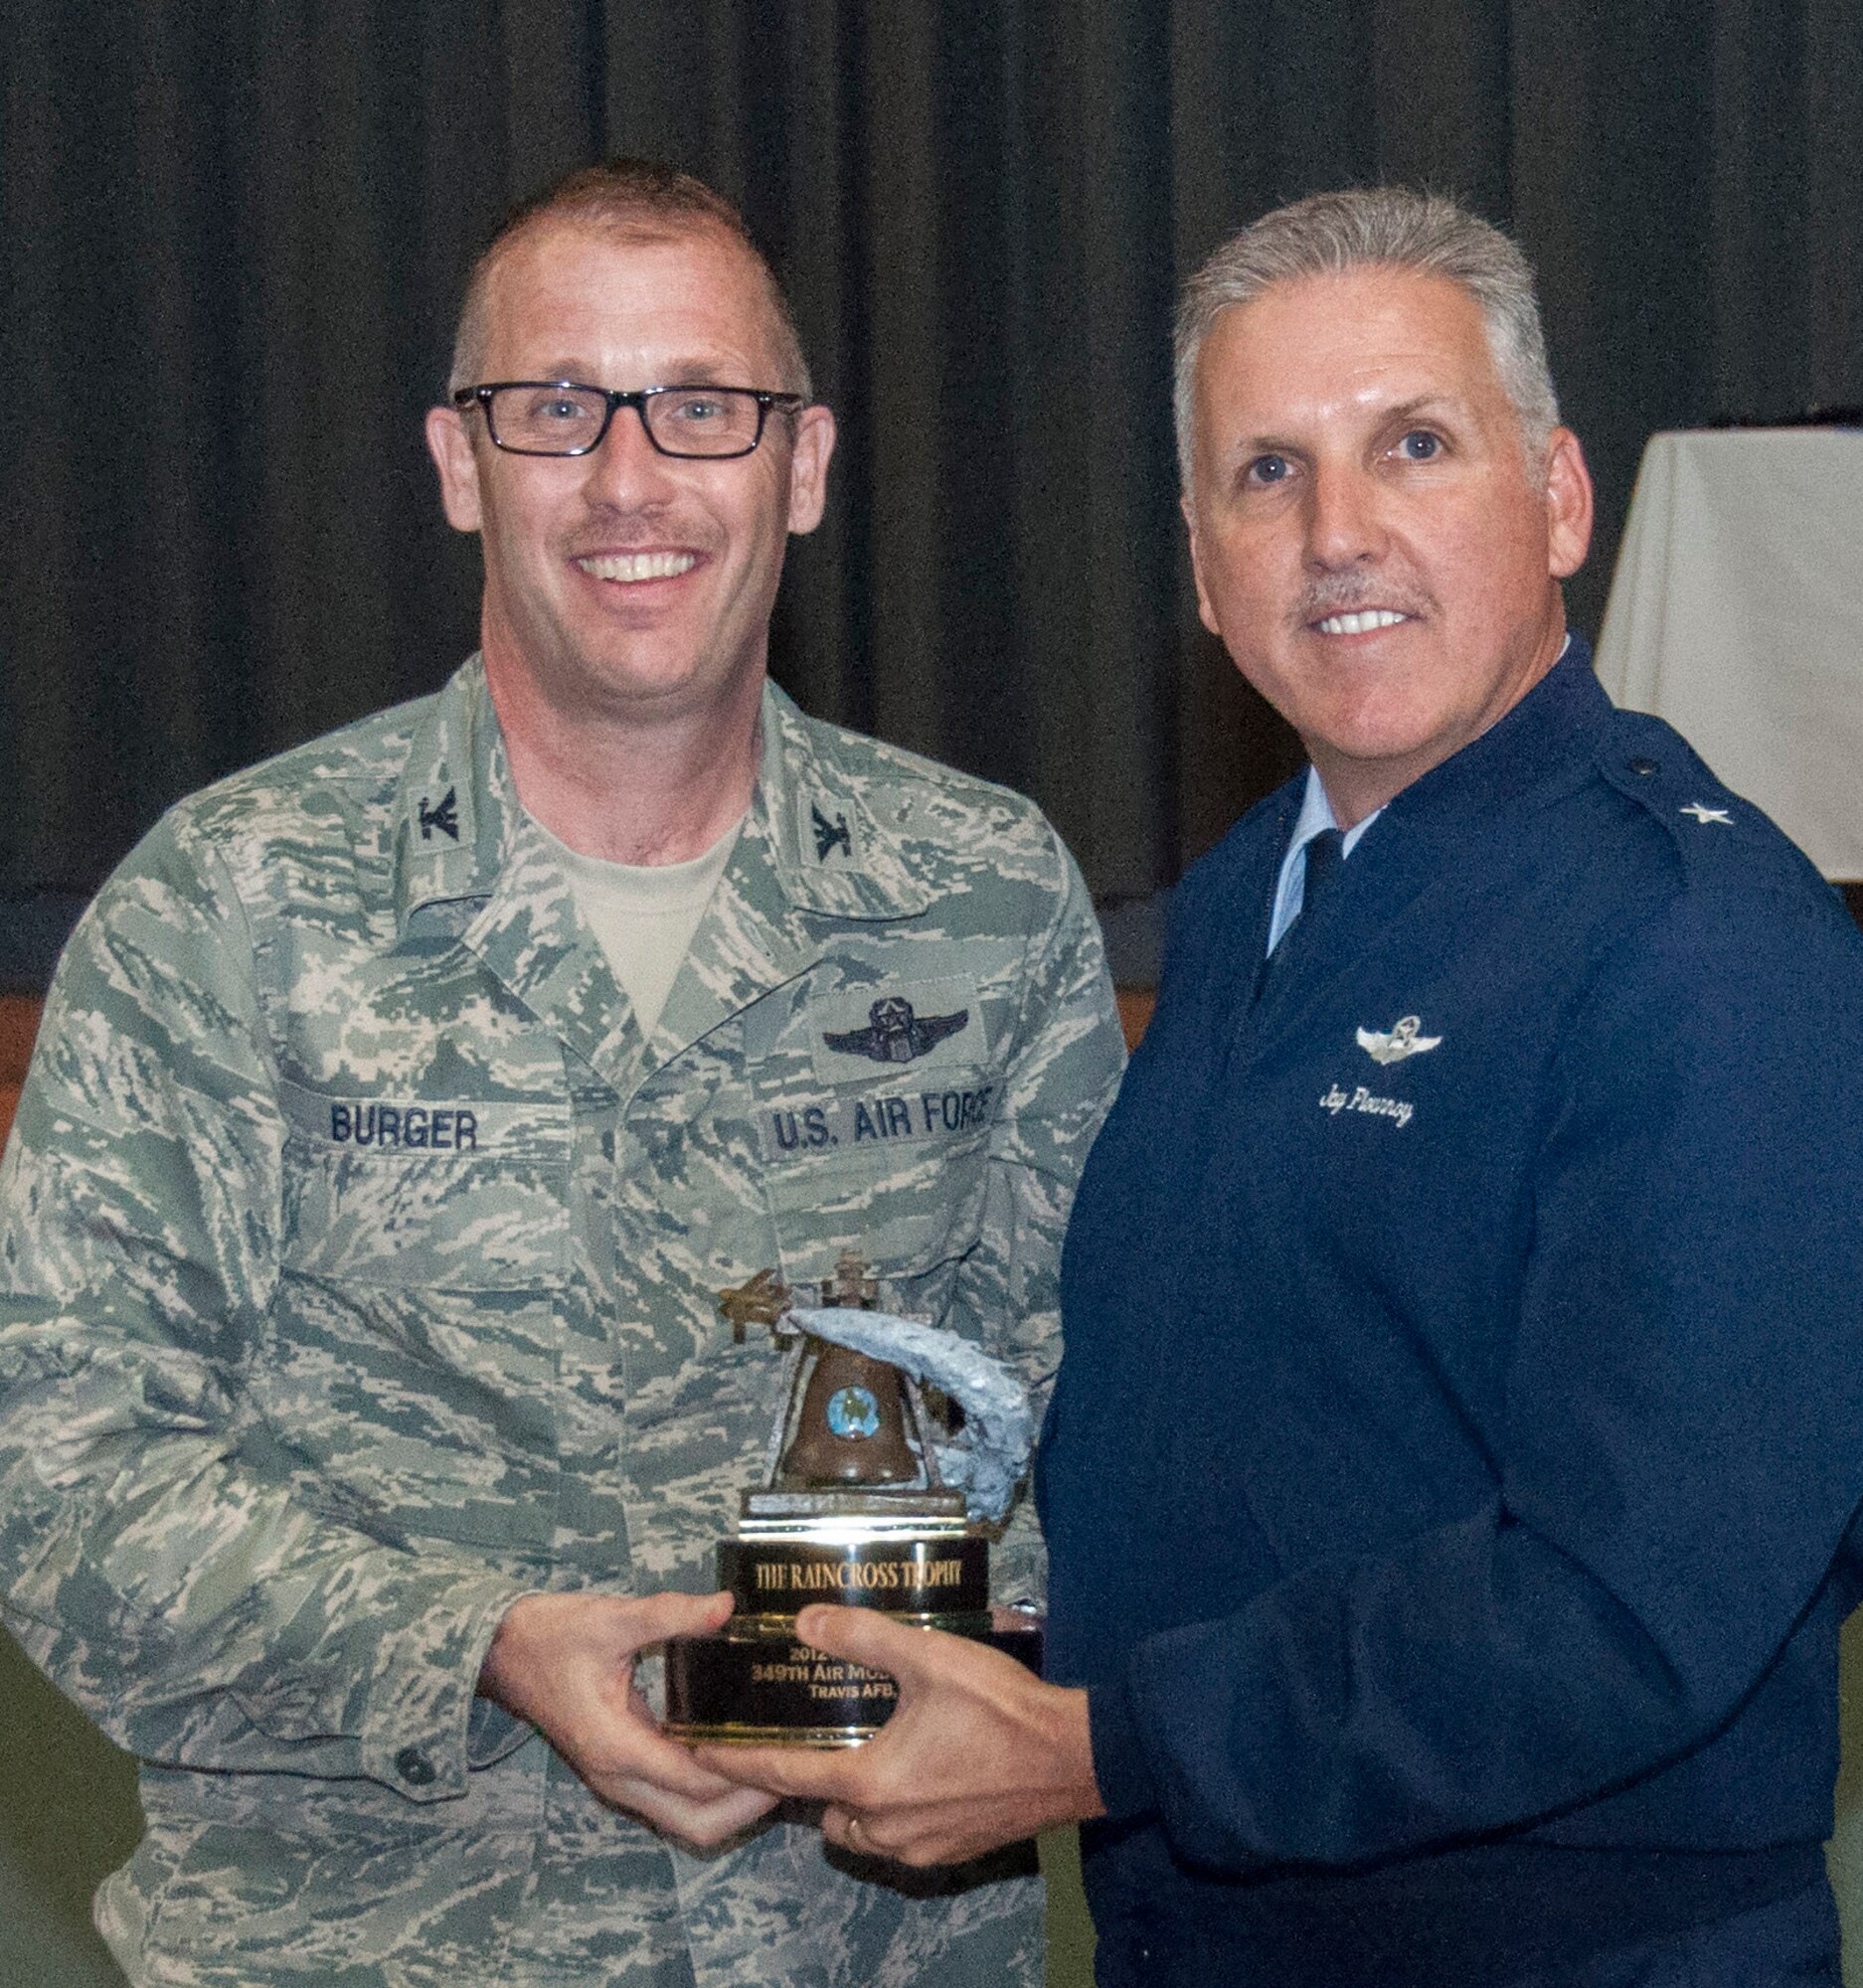 TRAVIS AIR FORCE BASE, Calif. --Brig. Gen. John C. Flournoy, Jr., 4th Air Force commander, presents the
Raincross Trophy to Col. Matthew Burger, 349th Air Mobility Wing commander,
for being the best wing in the numbered Air Force (NAF) for fiscal years
2012 and 2013. The presentation was made at a Commanders Call, Travis Air
Force Base, Calif., on March 9, 2014. The Greater Riverside Chambers of
Commerce in 1998 elected to commemorate the 'return home' of Fourth Air
Force, by creating the Raincross Trophy to honor the best of the best in 4th
Air Force. (U.S. Air Force photo by Master Sgt. Rachel Martinez)